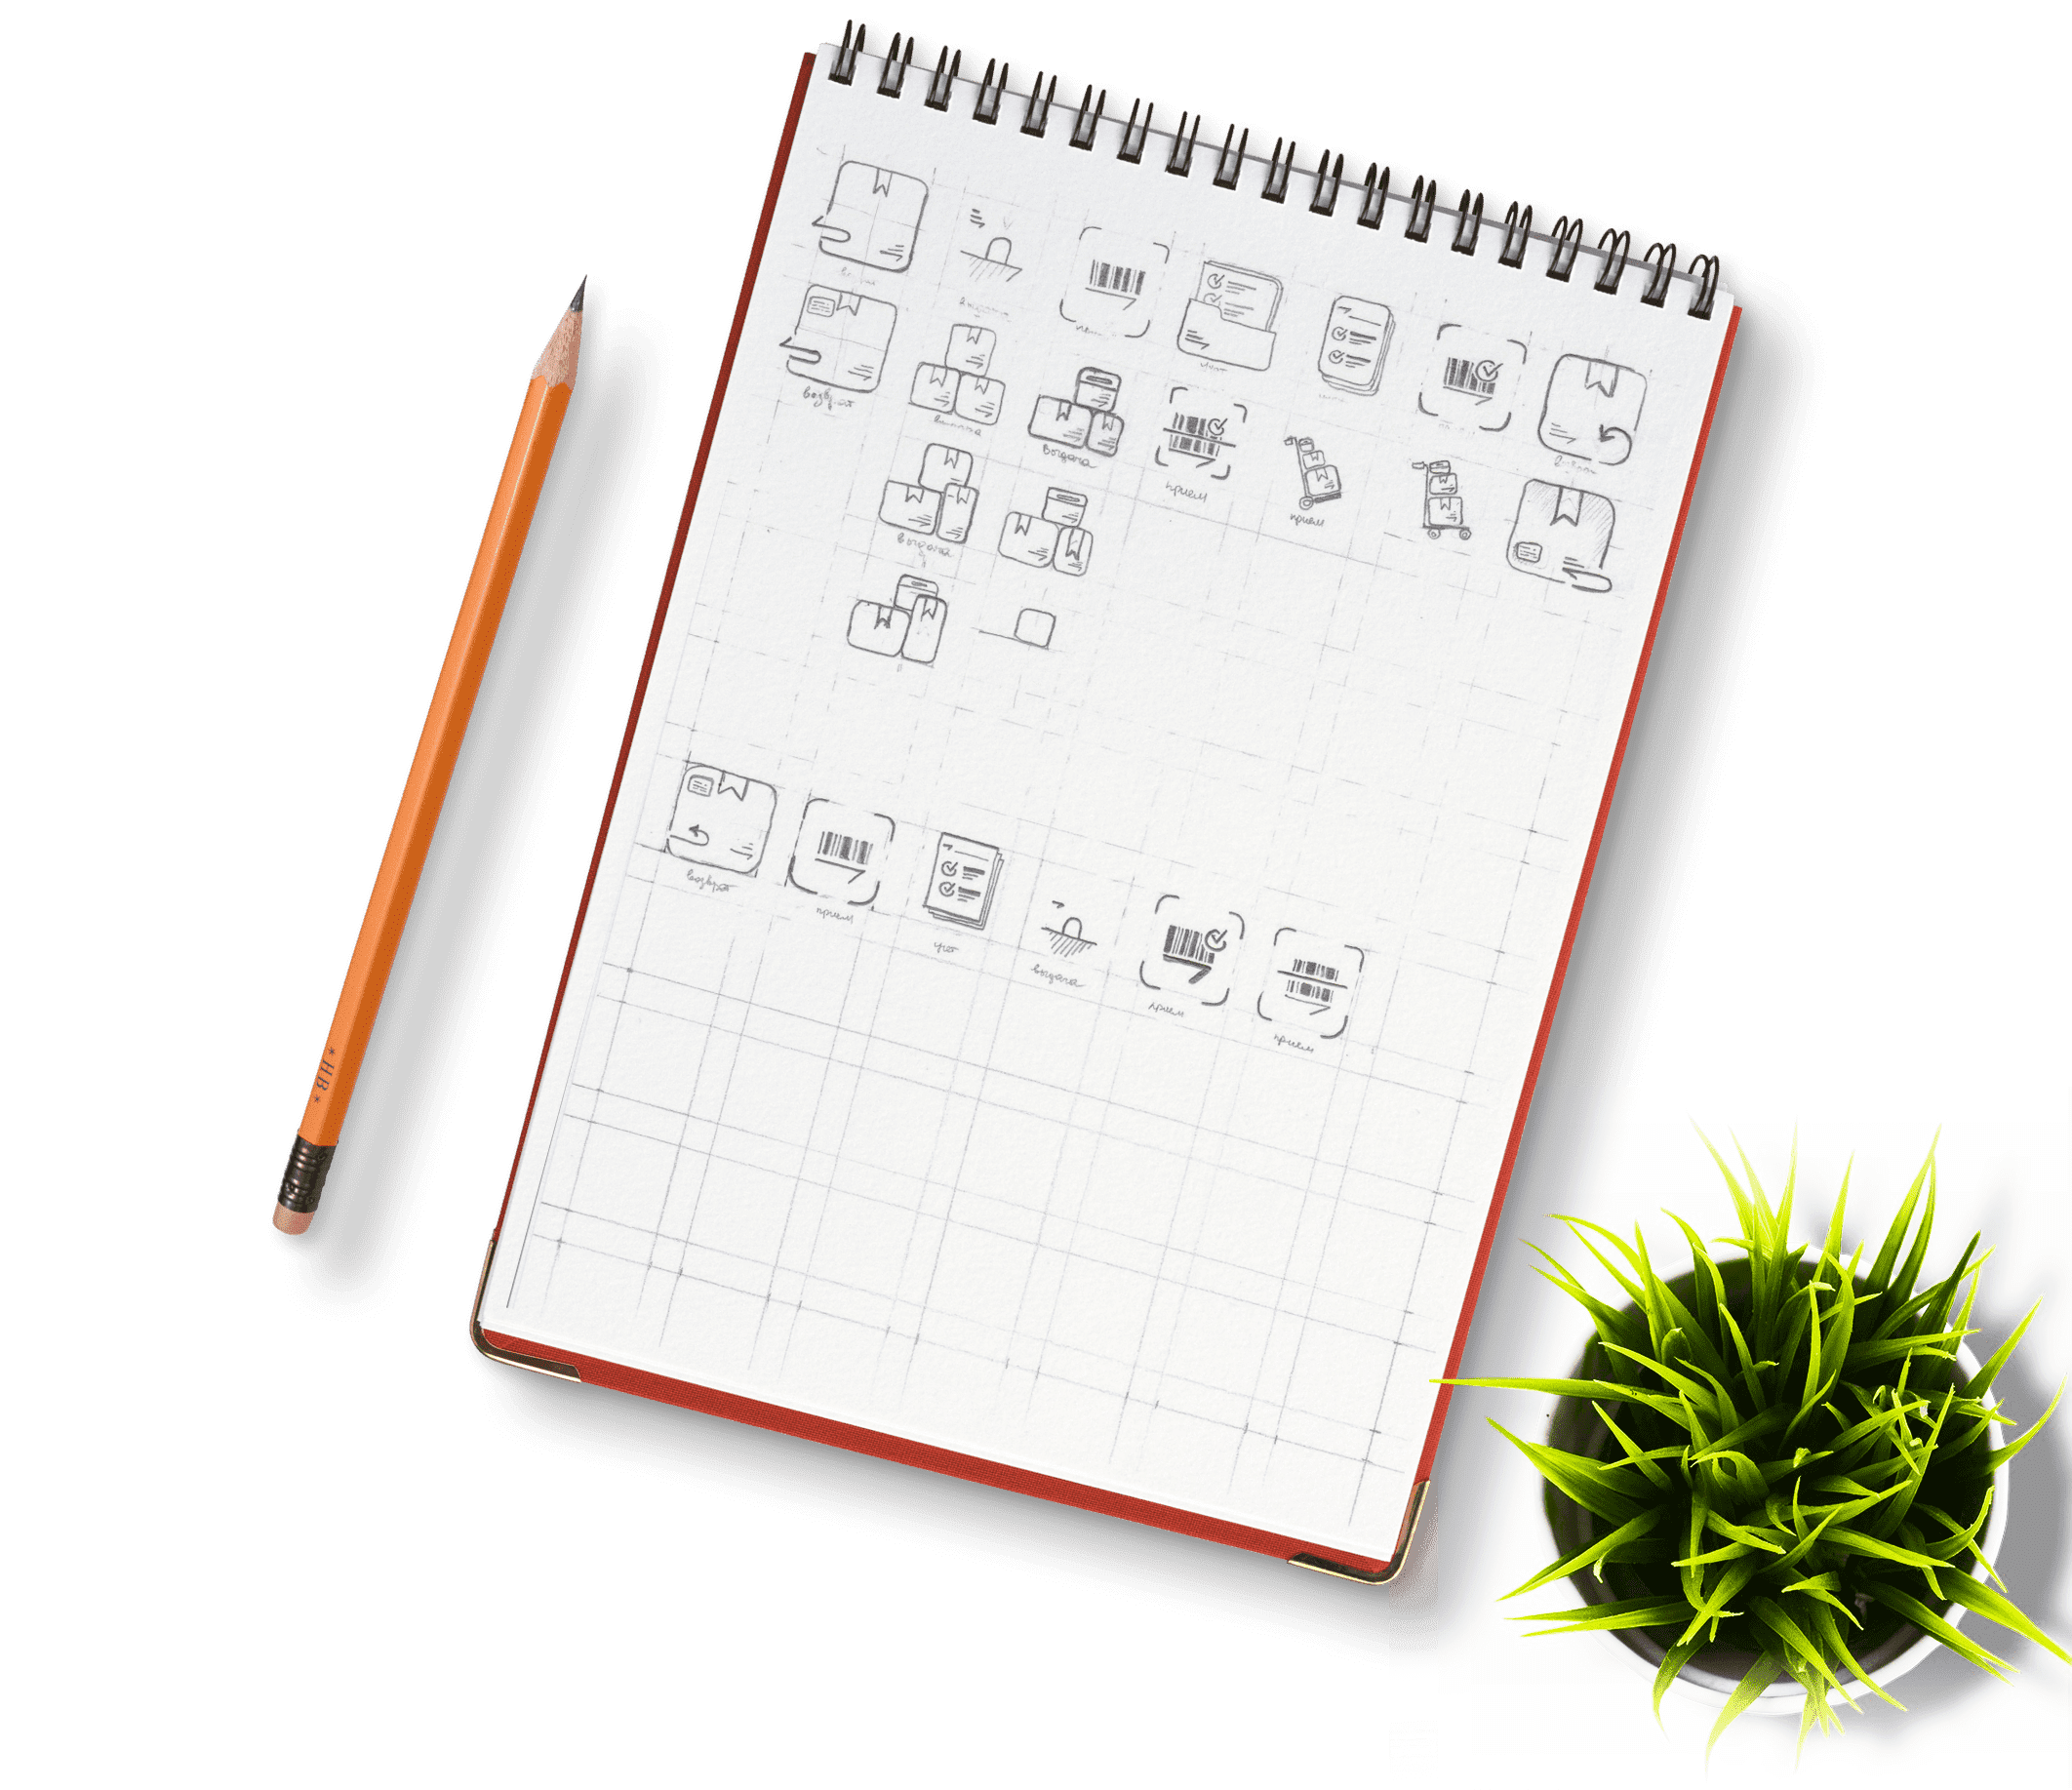 Pen and notebook with plant